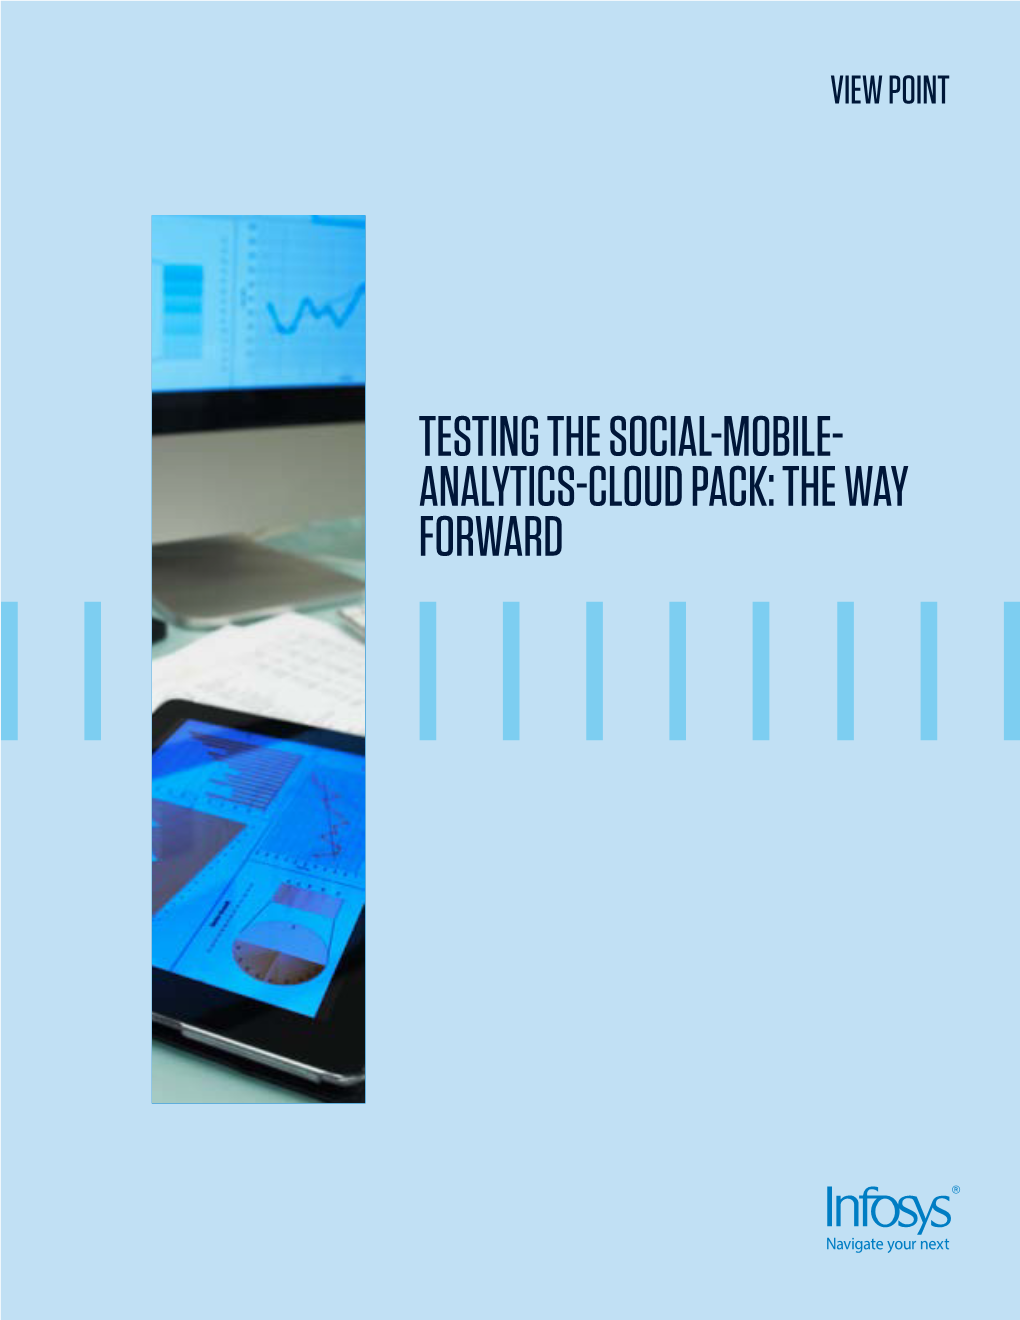 Testing the Social-Mobile- Analytics-Cloud Pack: the Way Forward